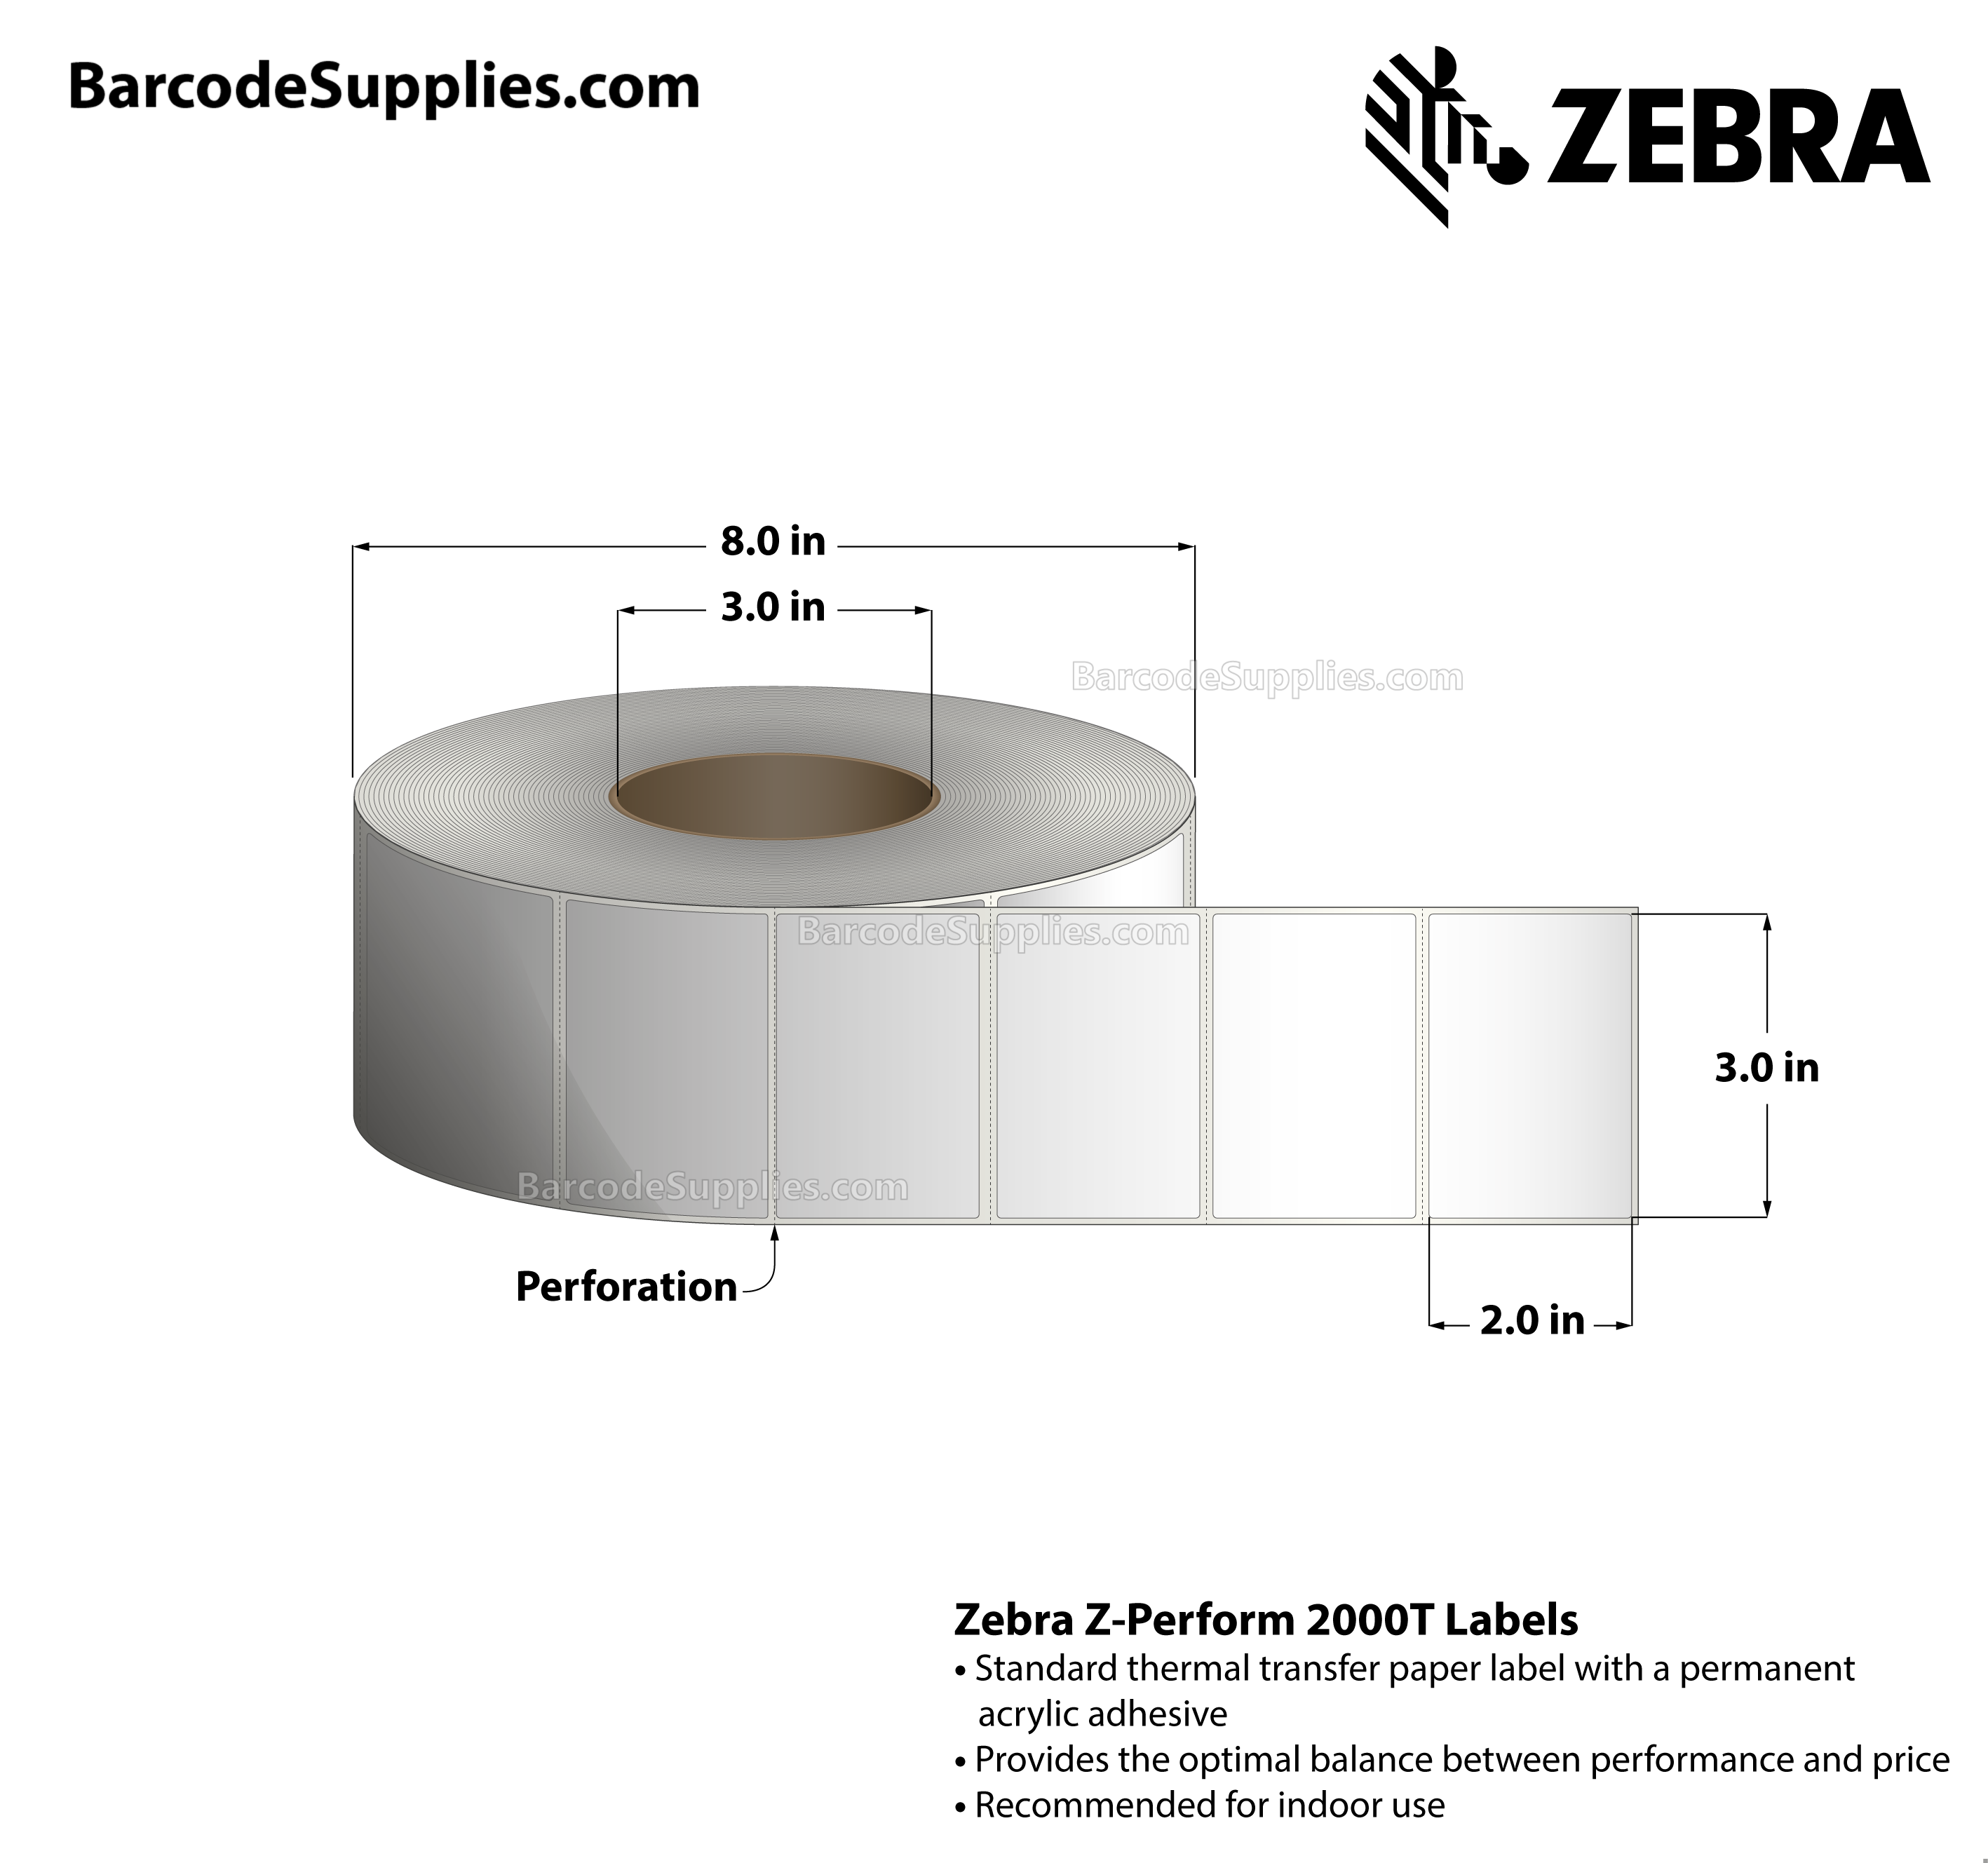 3 x 2 Thermal Transfer White Z-Perform 2000T Labels With Permanent Adhesive - Perforated - 2750 Labels Per Roll - Carton Of 6 Rolls - 16500 Labels Total - MPN: 10000286